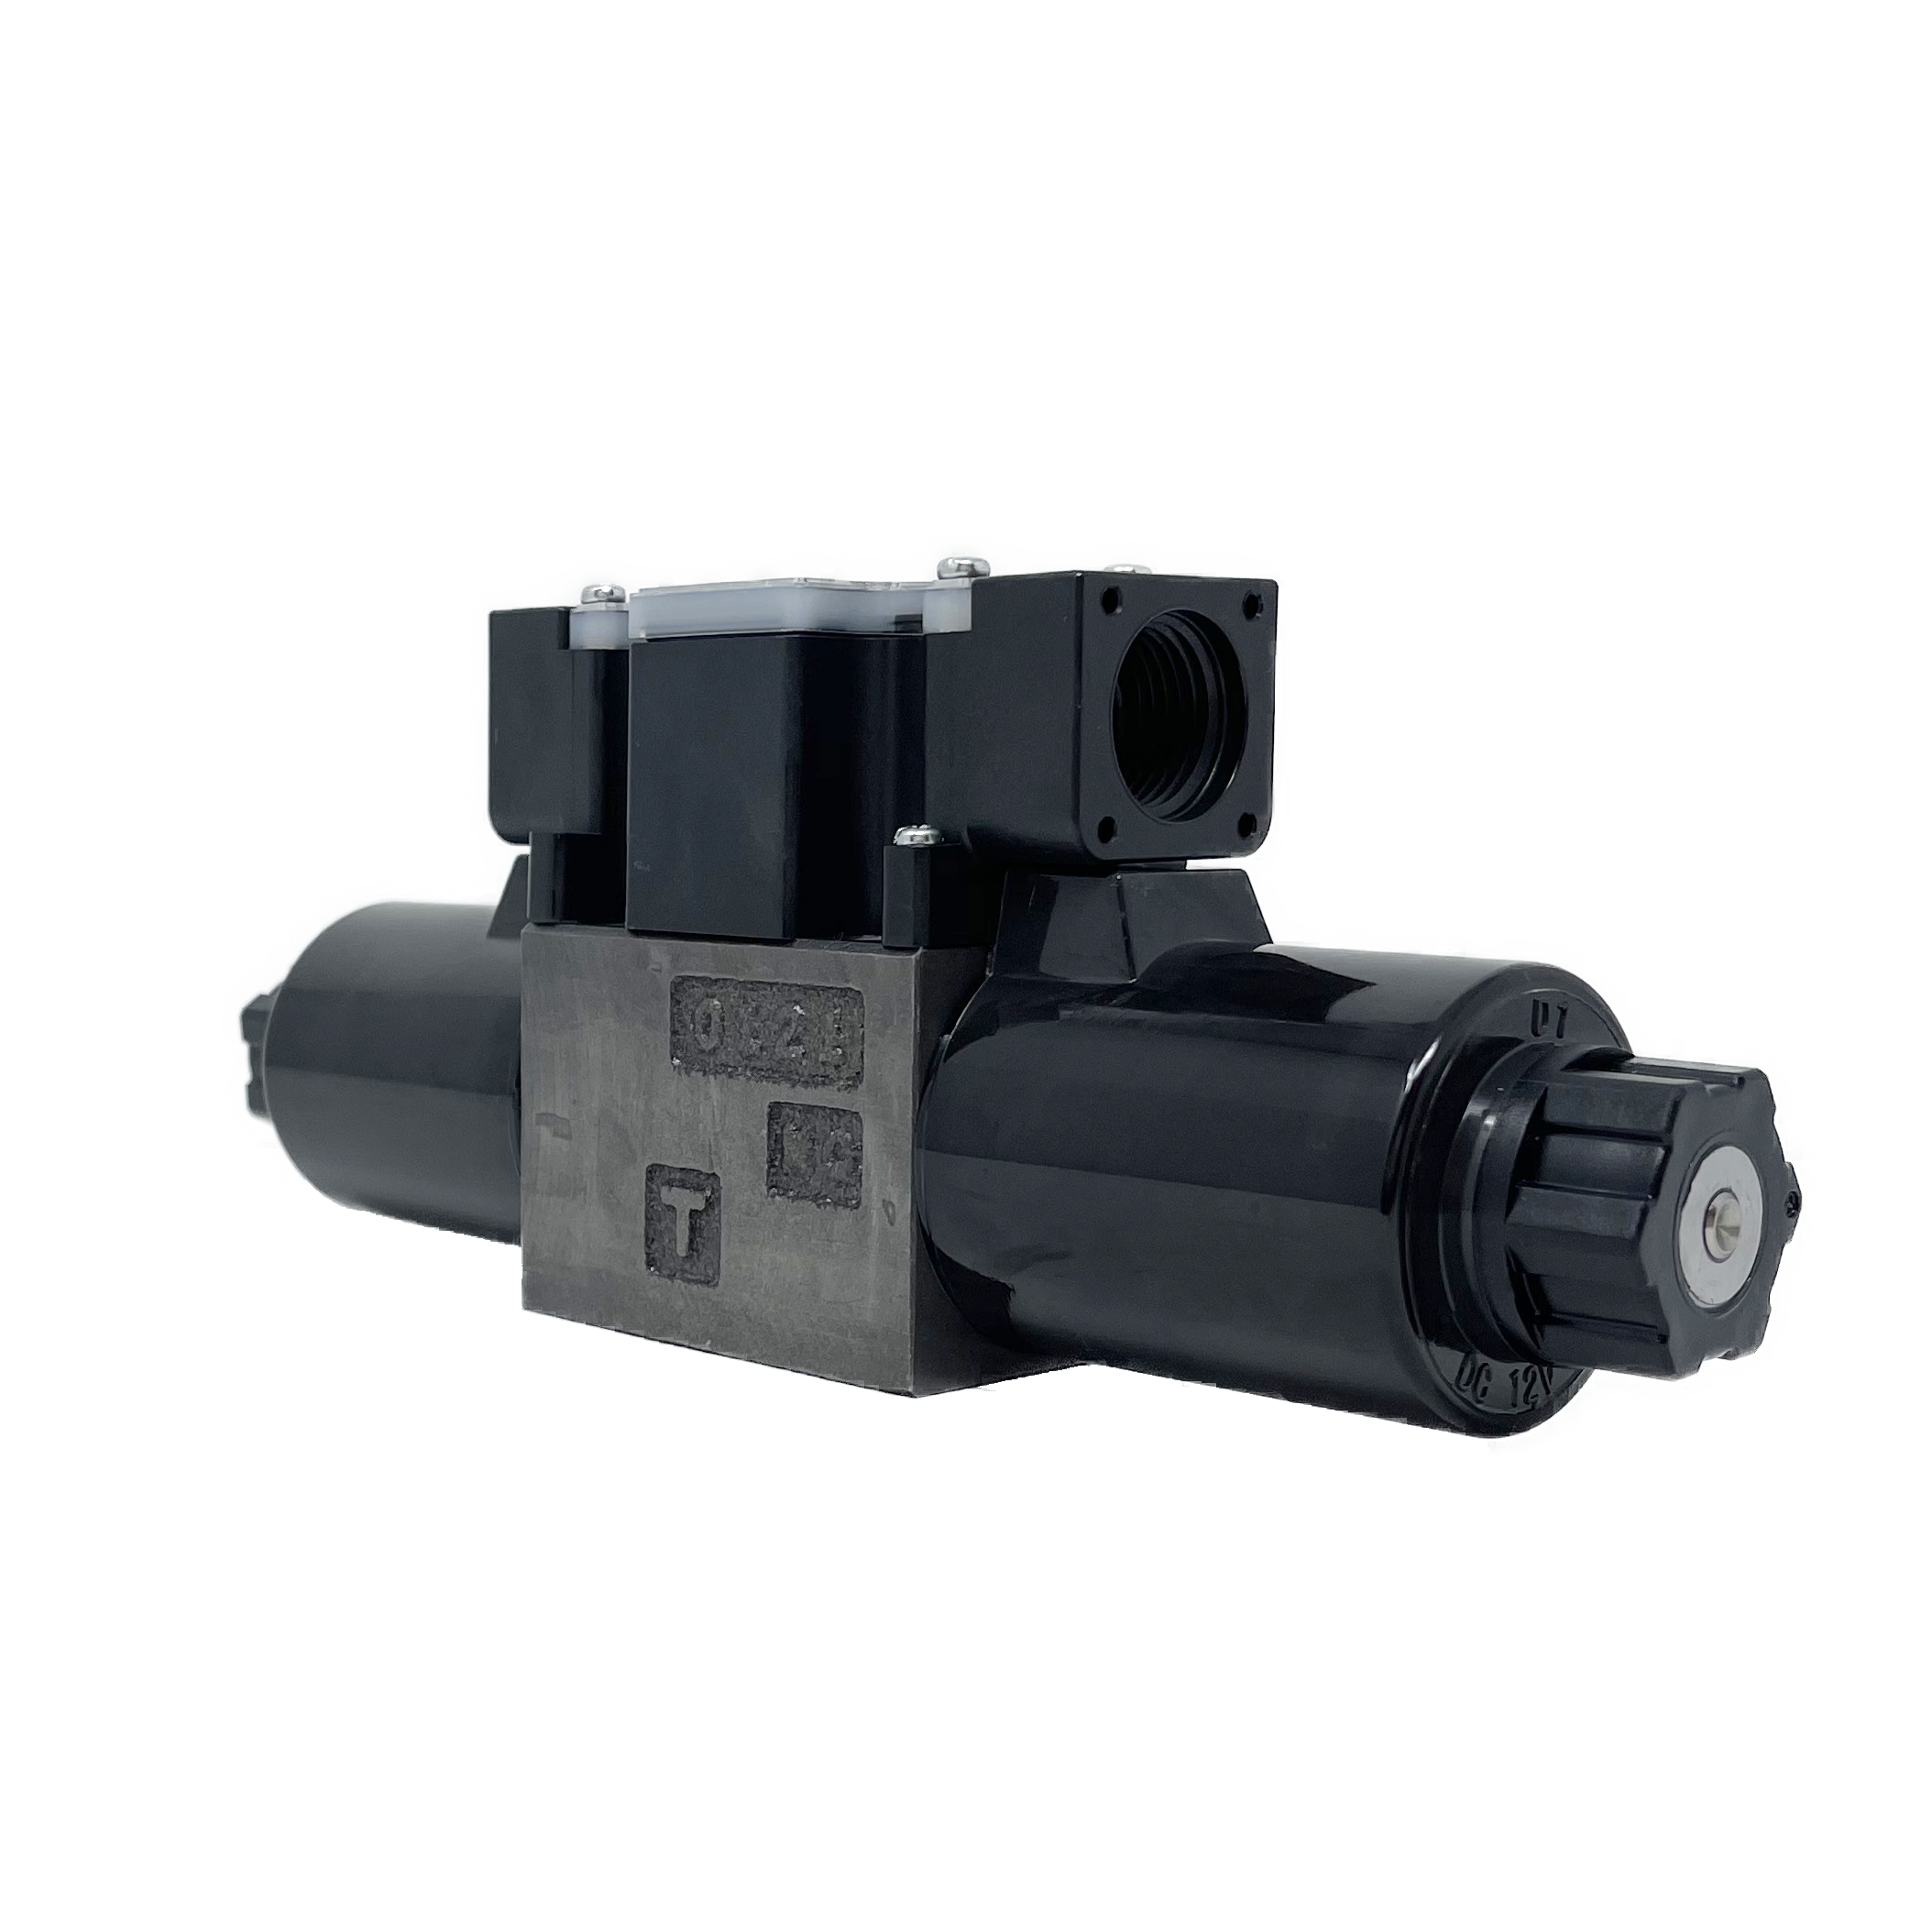 SS-G01-C6-FR-D1-E31 : Nachi Solenoid Valve, 3P4W, D03 (NG6), 21.1GPM, 5075psi, Motor Spool, 12 VDC, Wiring Box with Lights, Shockless Type